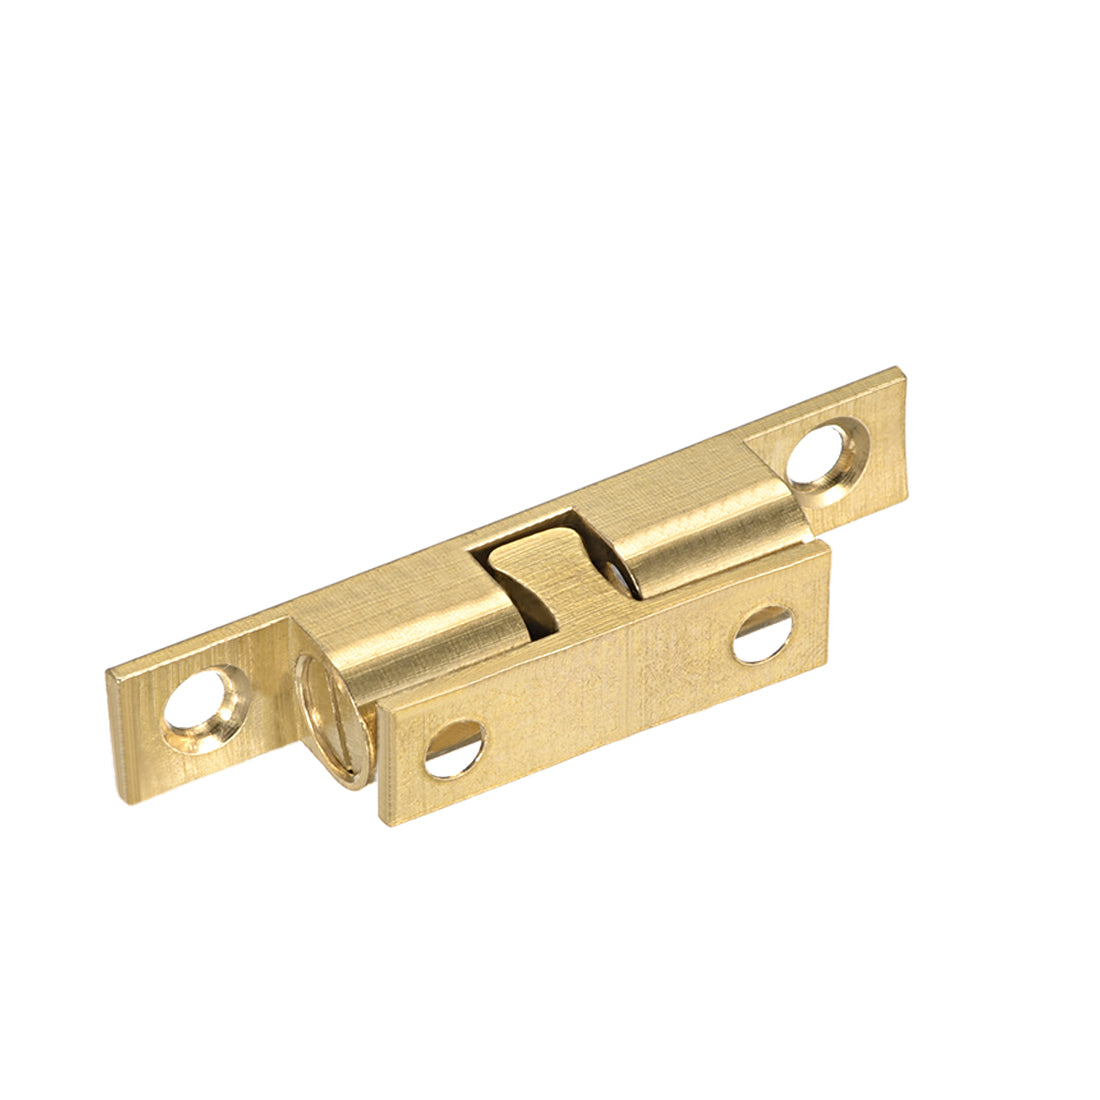 uxcell Uxcell Cabinet Door Closet Brass Double Ball Catch Tension Latch 60mm Length Gold Tone